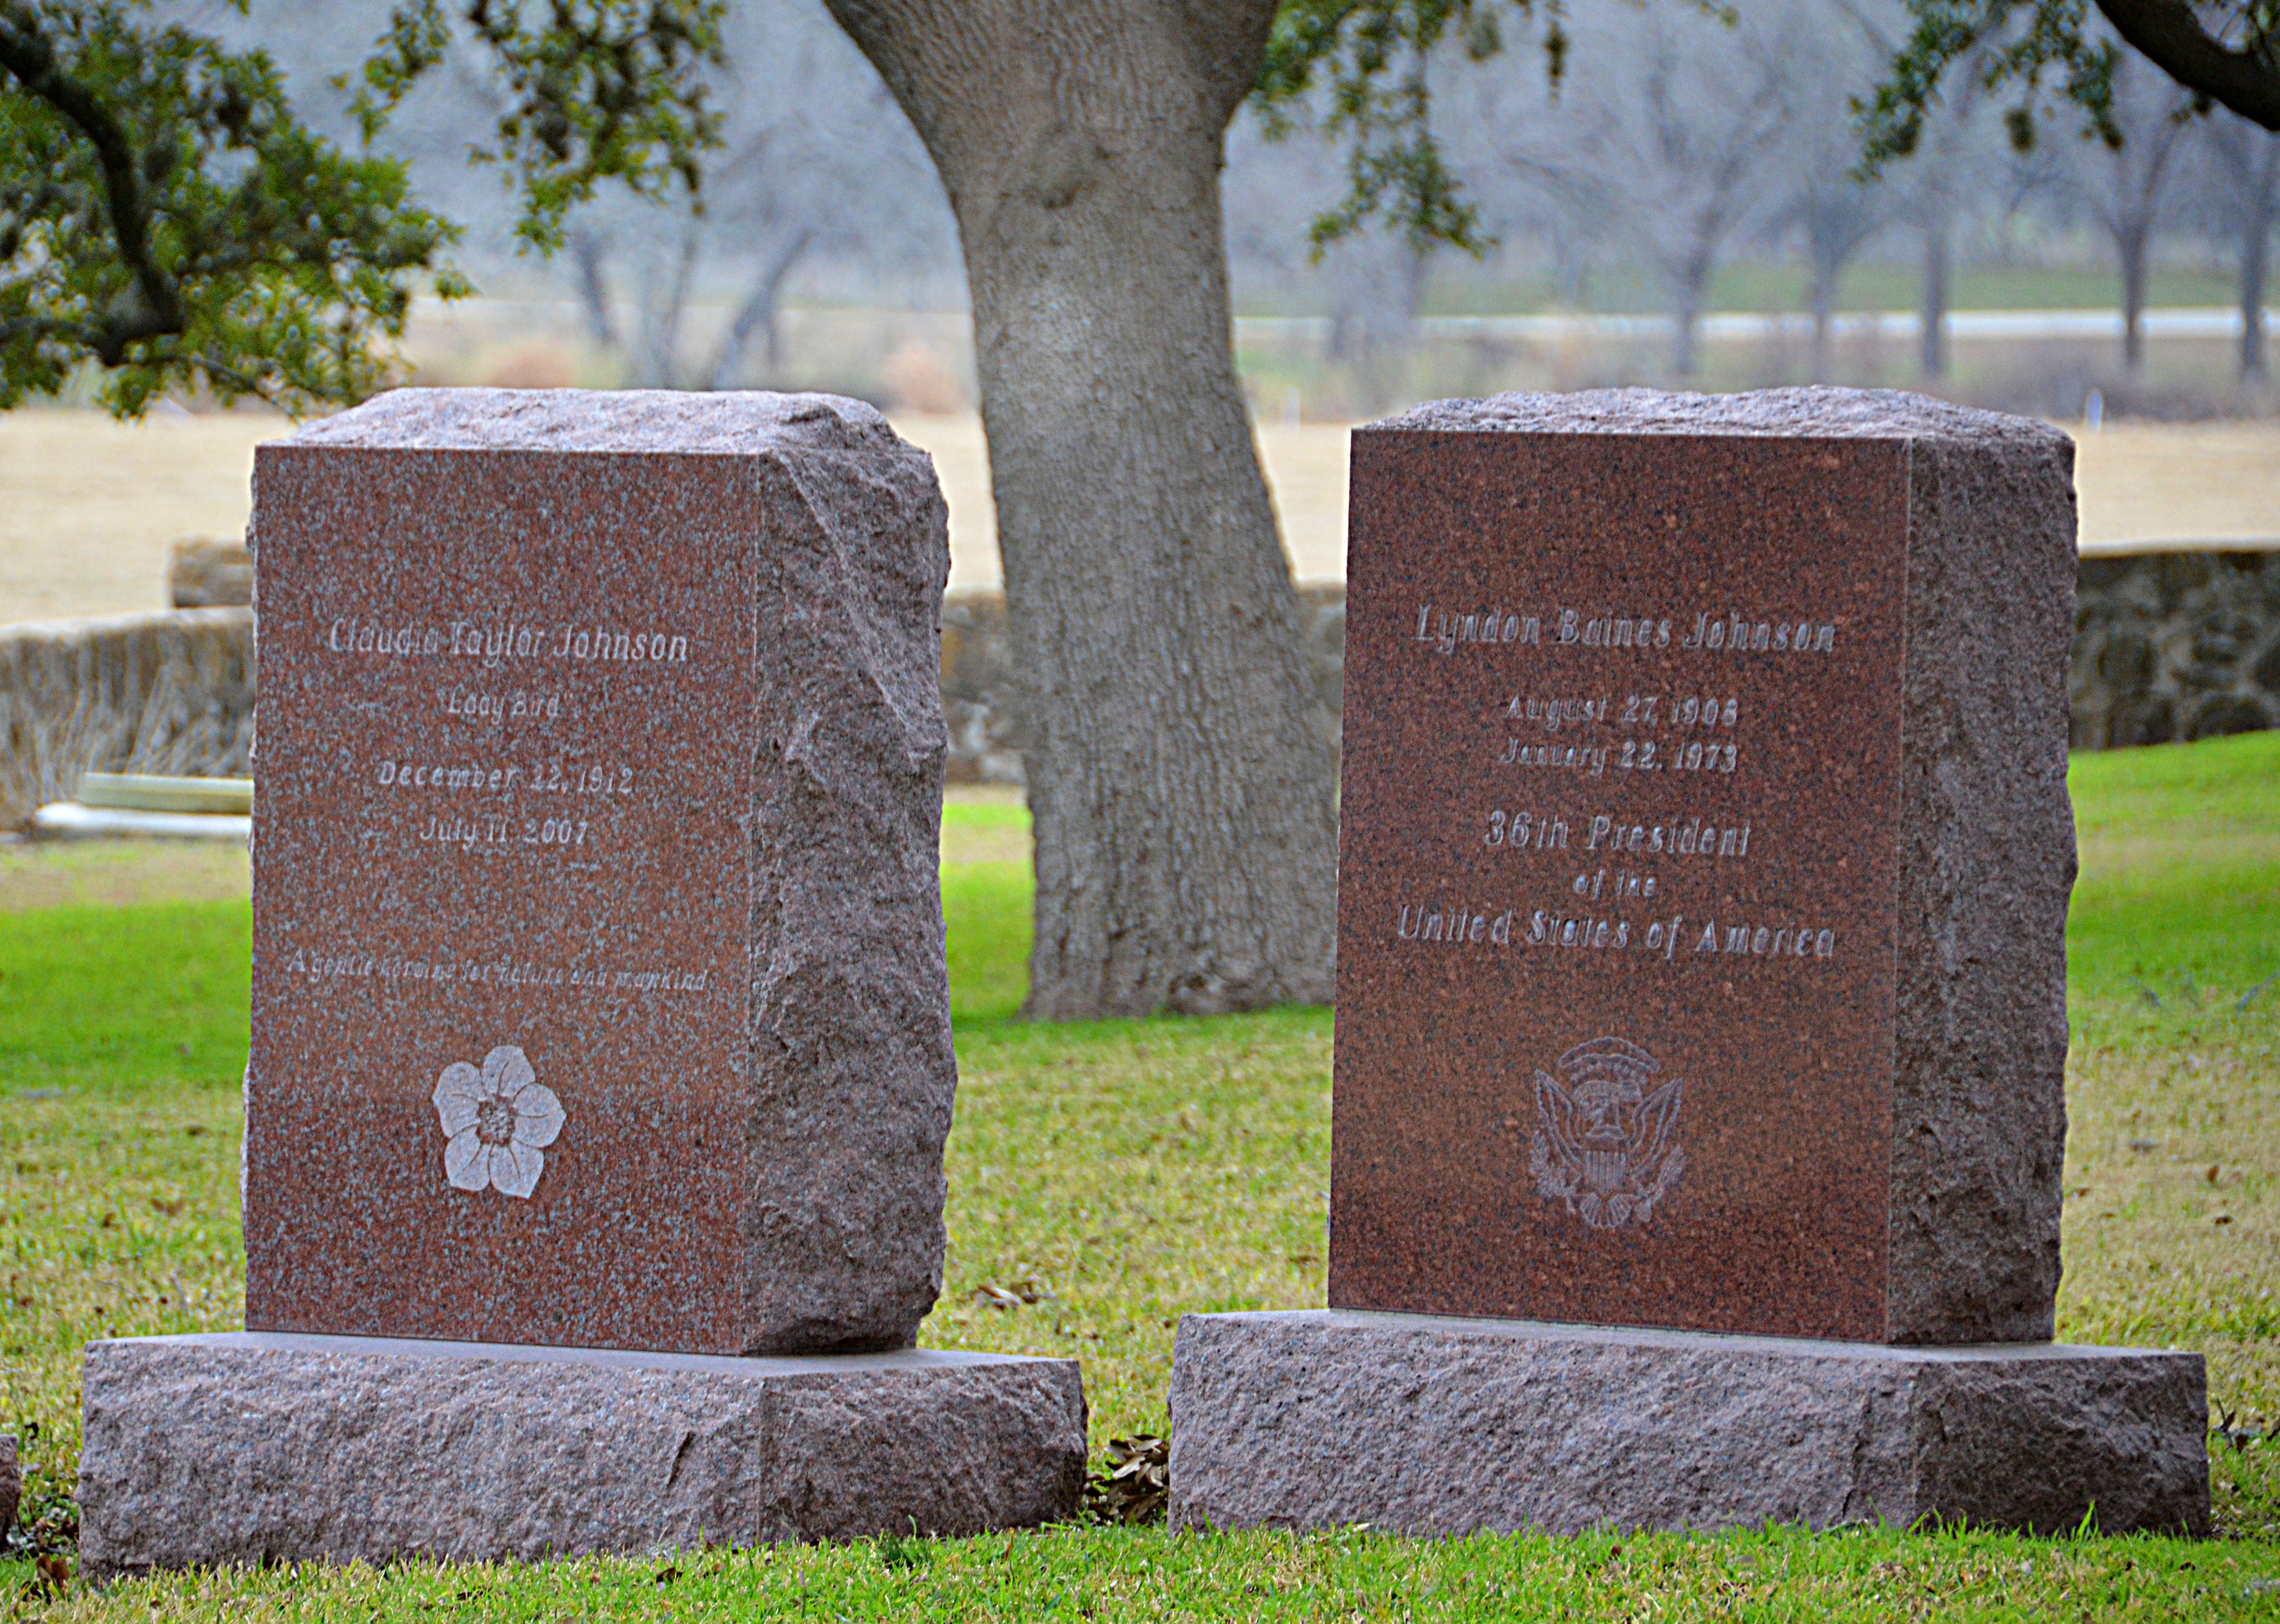 Pink granite headstones mark the graves of President Lyndon Johnson and First Lady Lady Bird Johnson